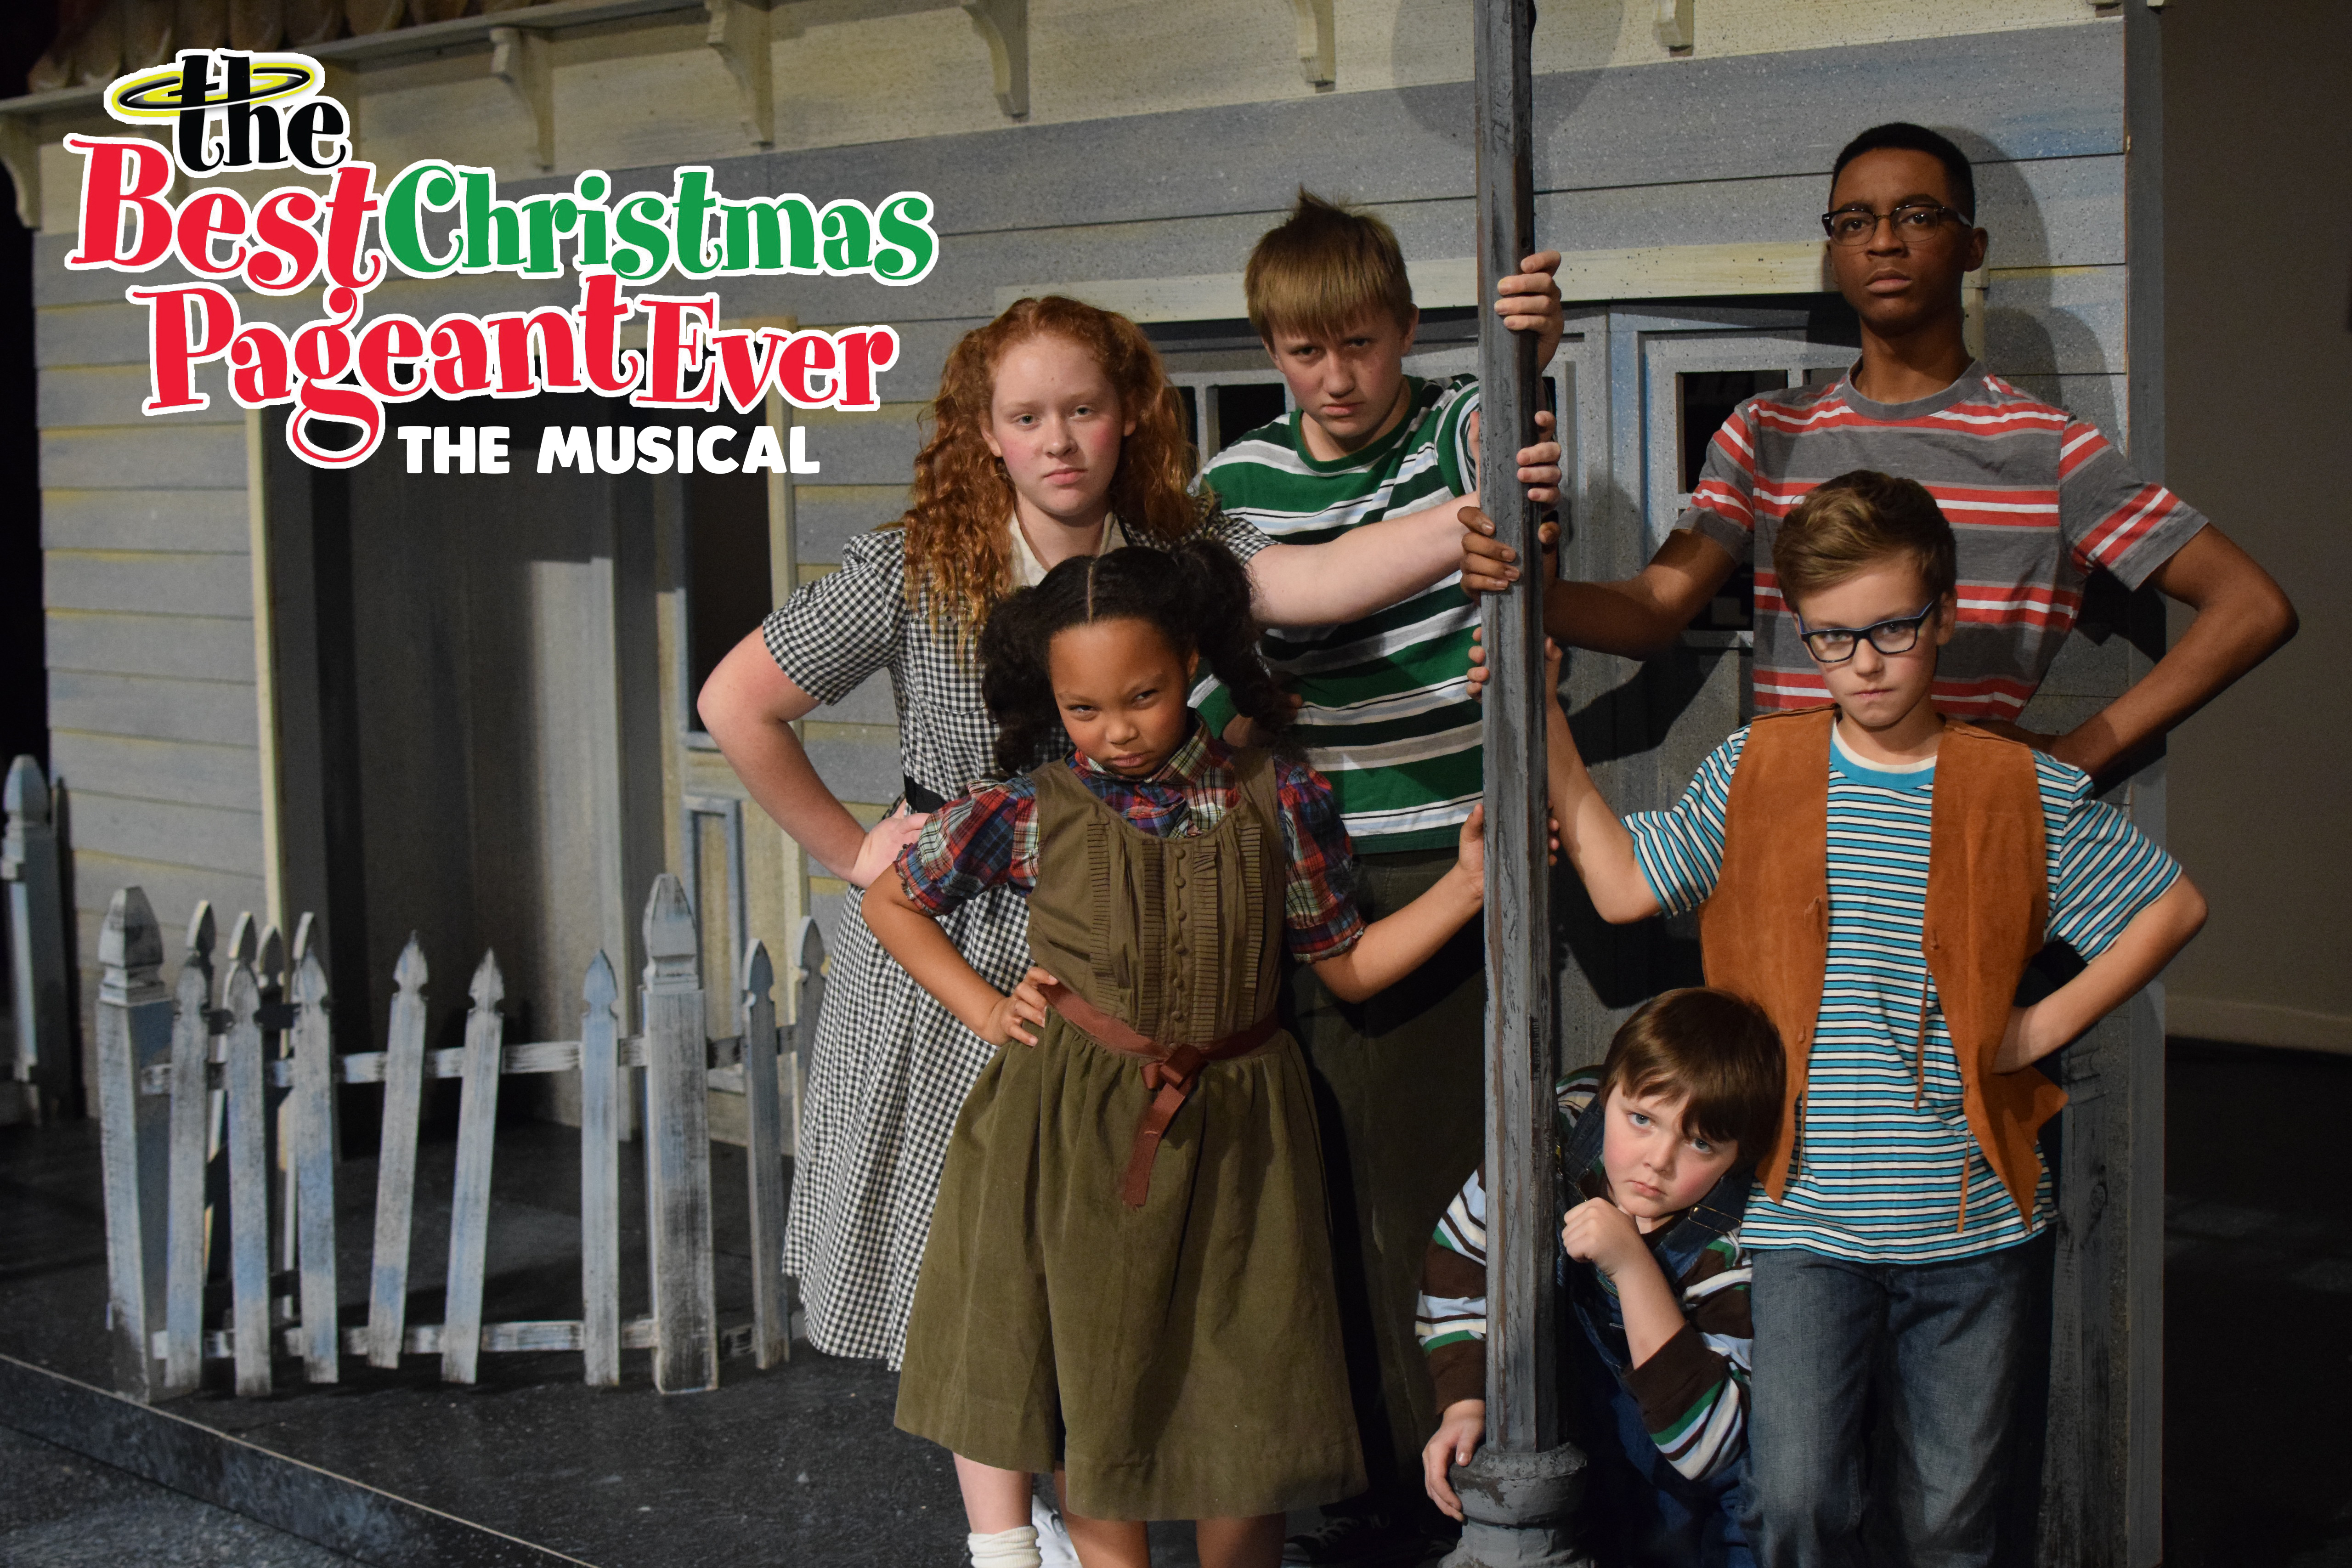 The Best Christmas Pageant Ever | The Rose Theater